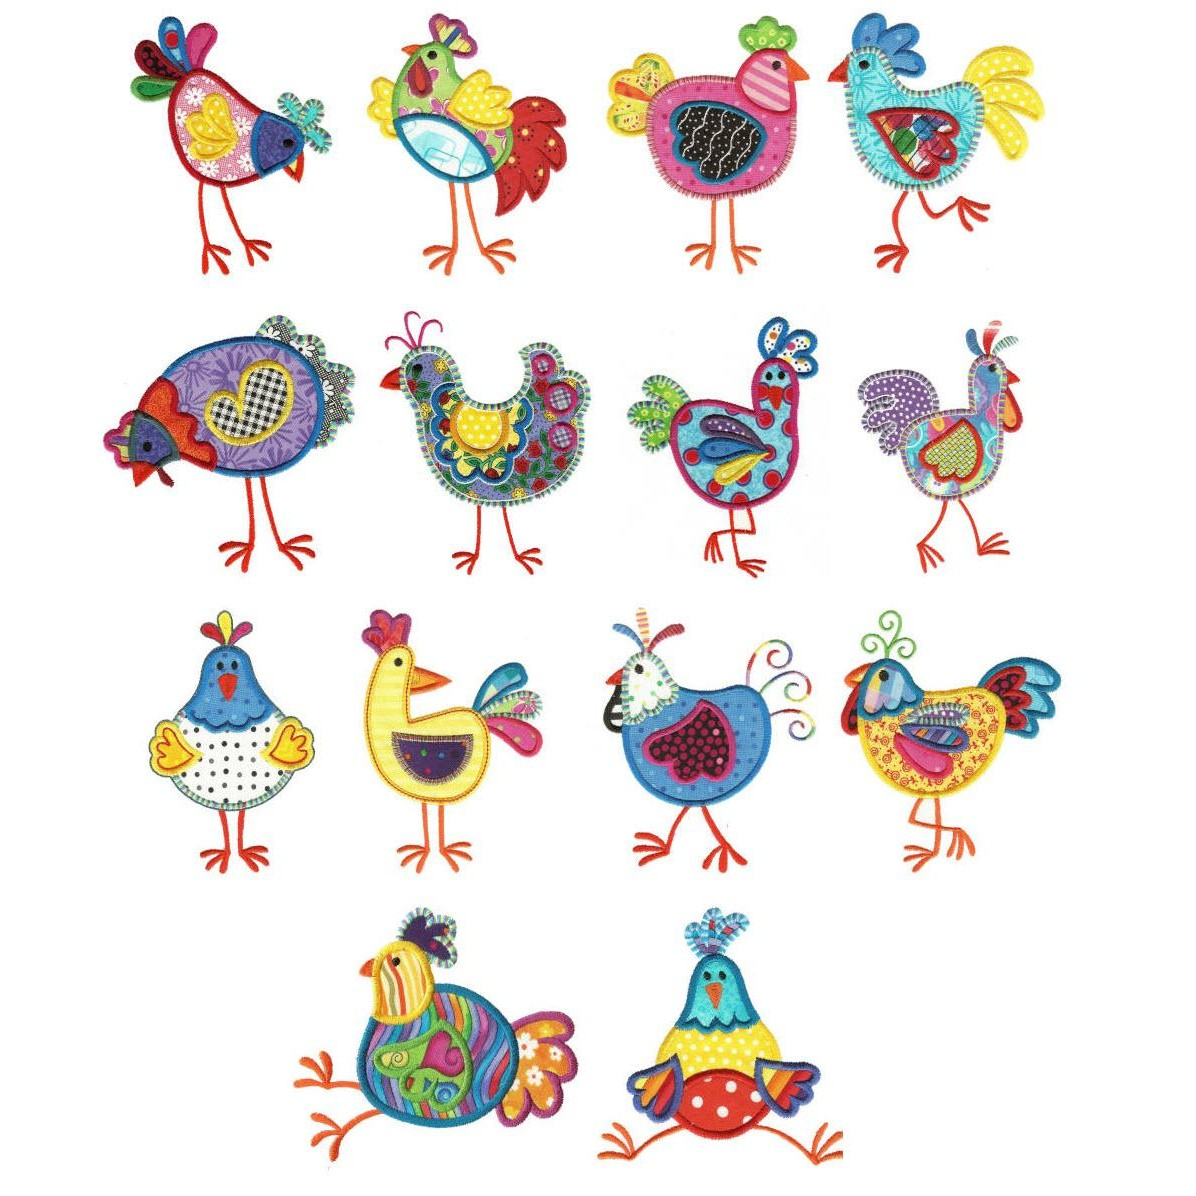 Chicken Embroidery Patterns Free 16 Applique Machine Embroidery Designs Images Free Applique Flower